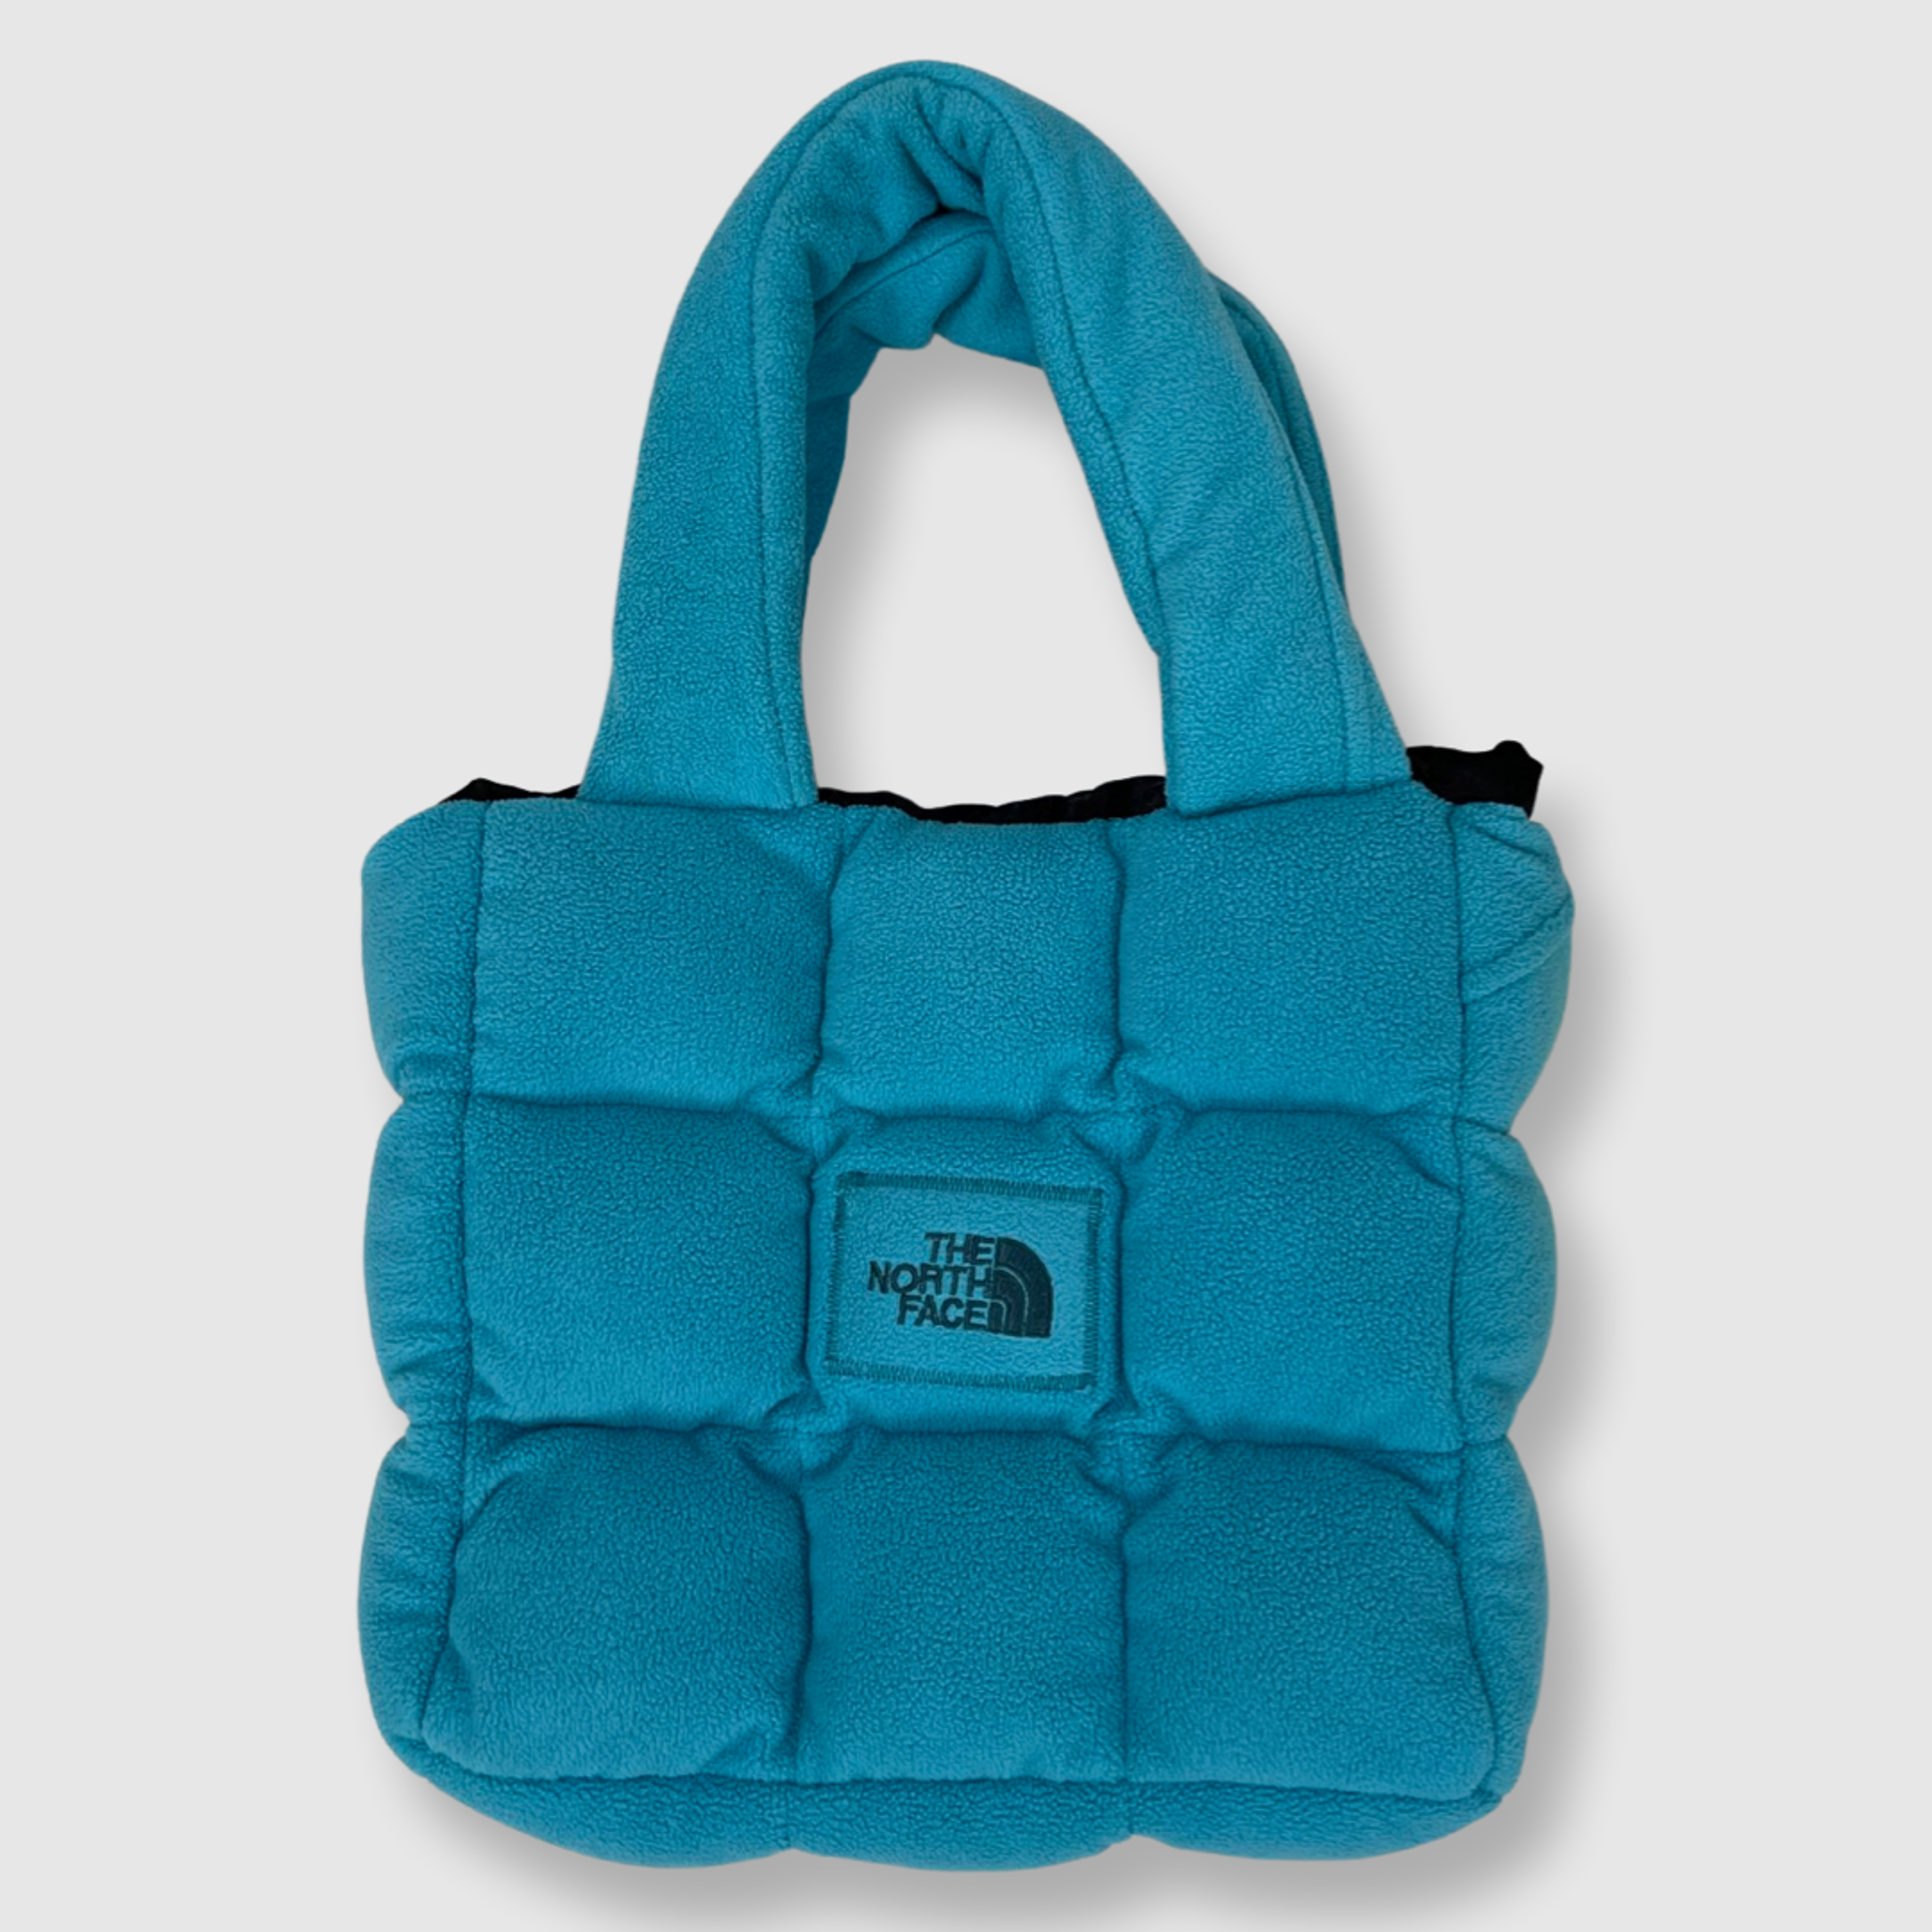 Alternate View 1 of Everyday Blue Puffer Bag